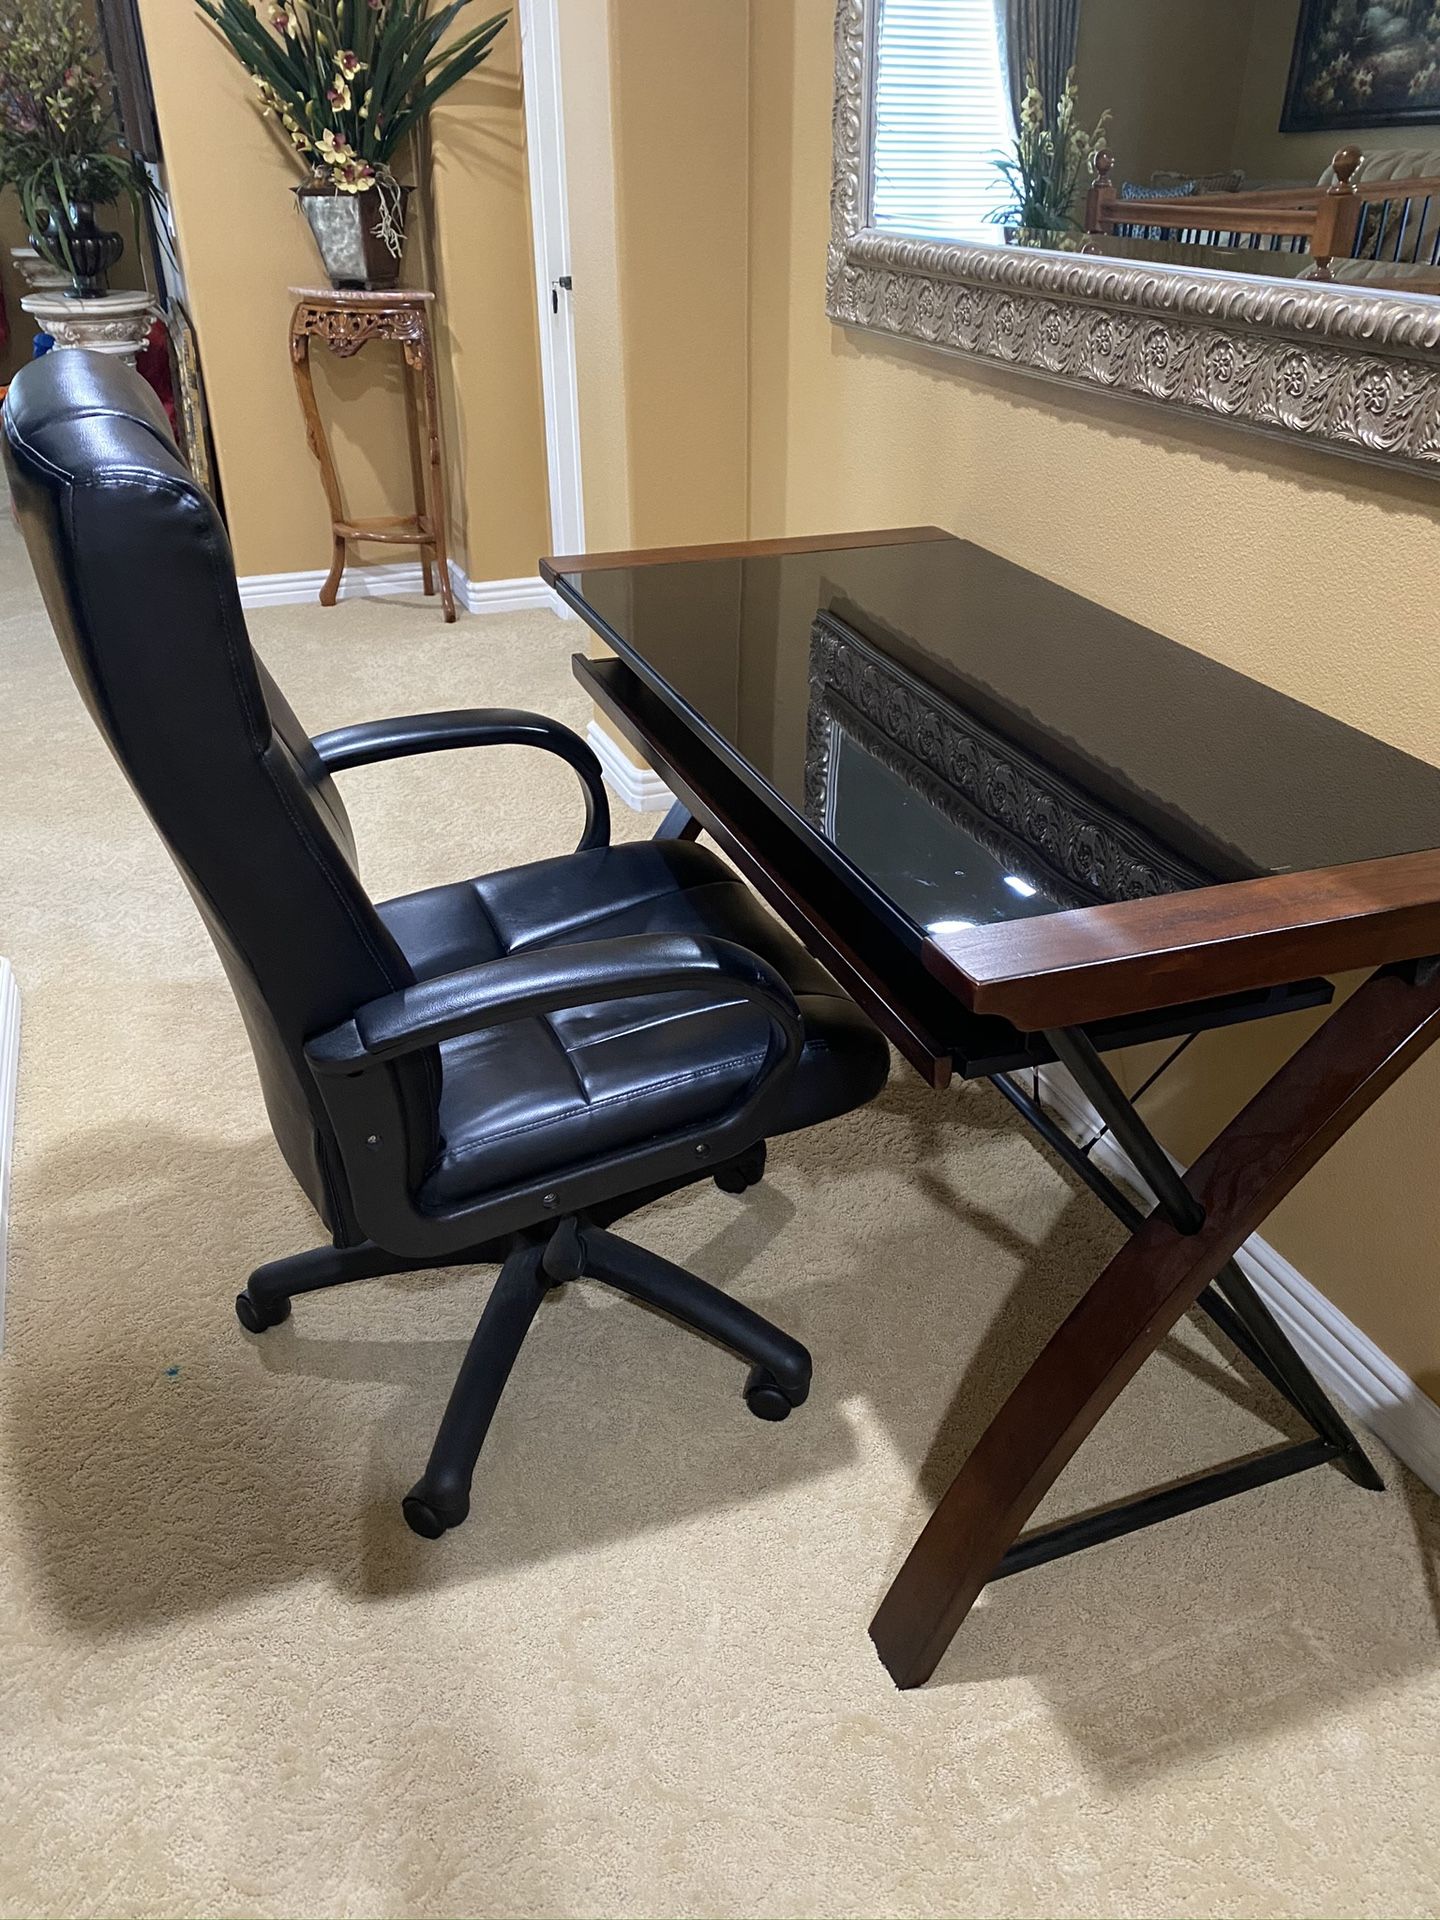 Good condition wood desk and leather chair